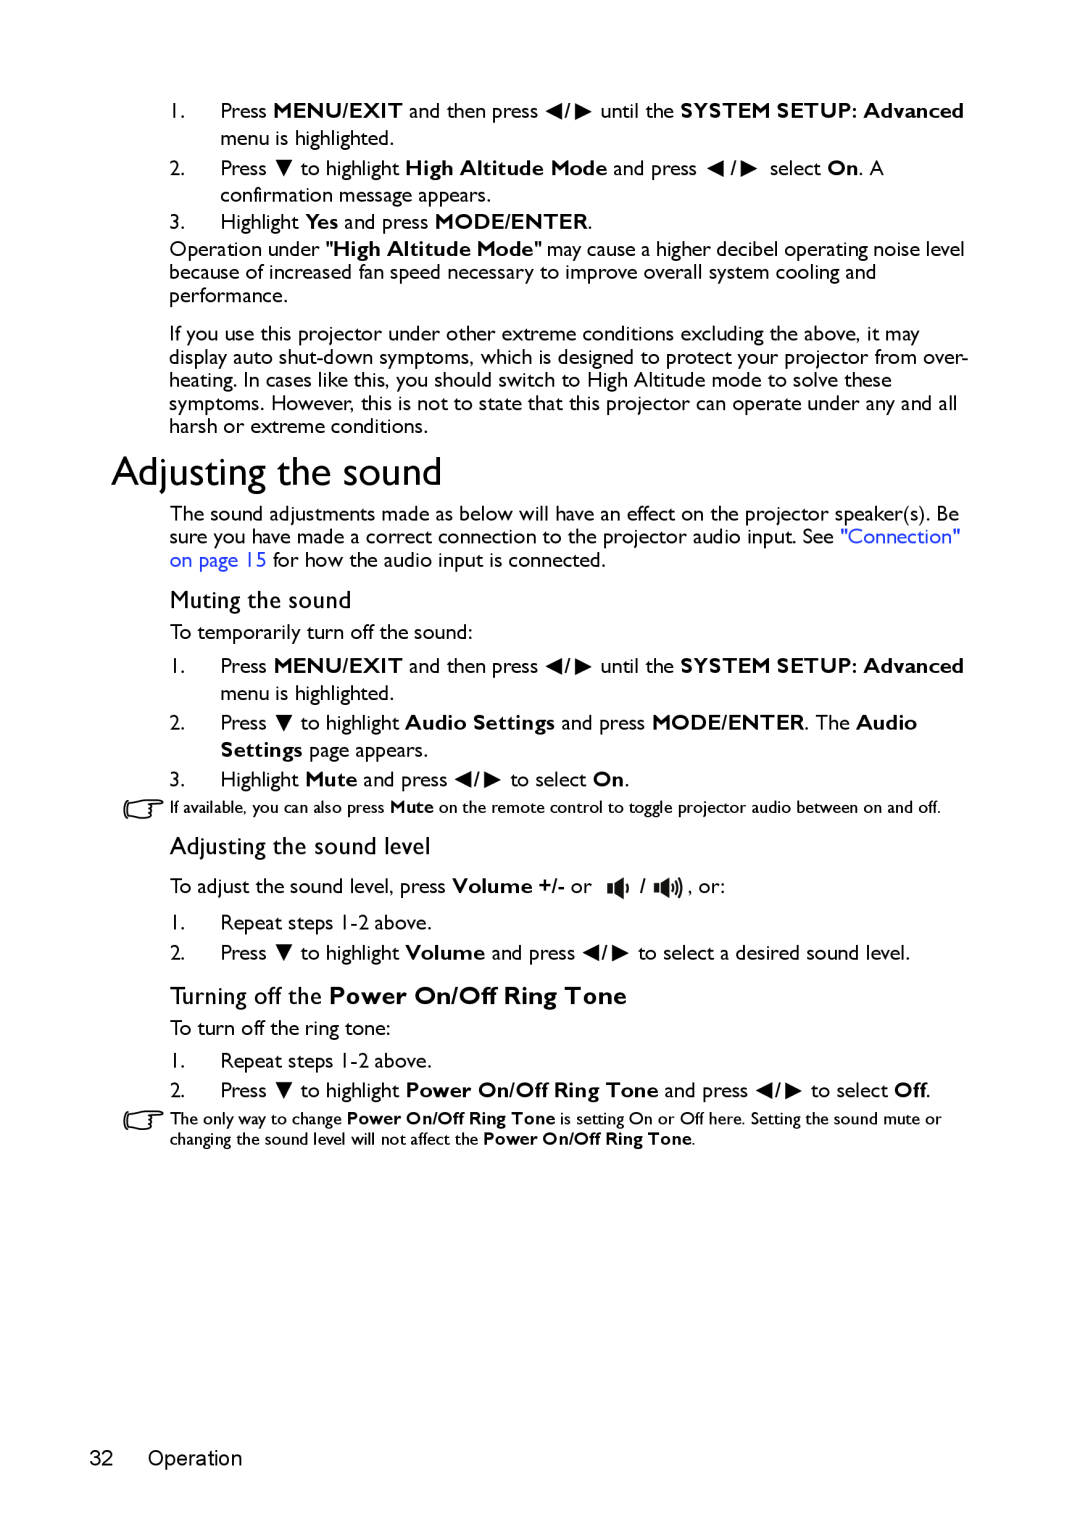 BenQ mx618st, ms616st user manual Muting the sound, Adjusting the sound level, Turning off the Power On/Off Ring Tone 